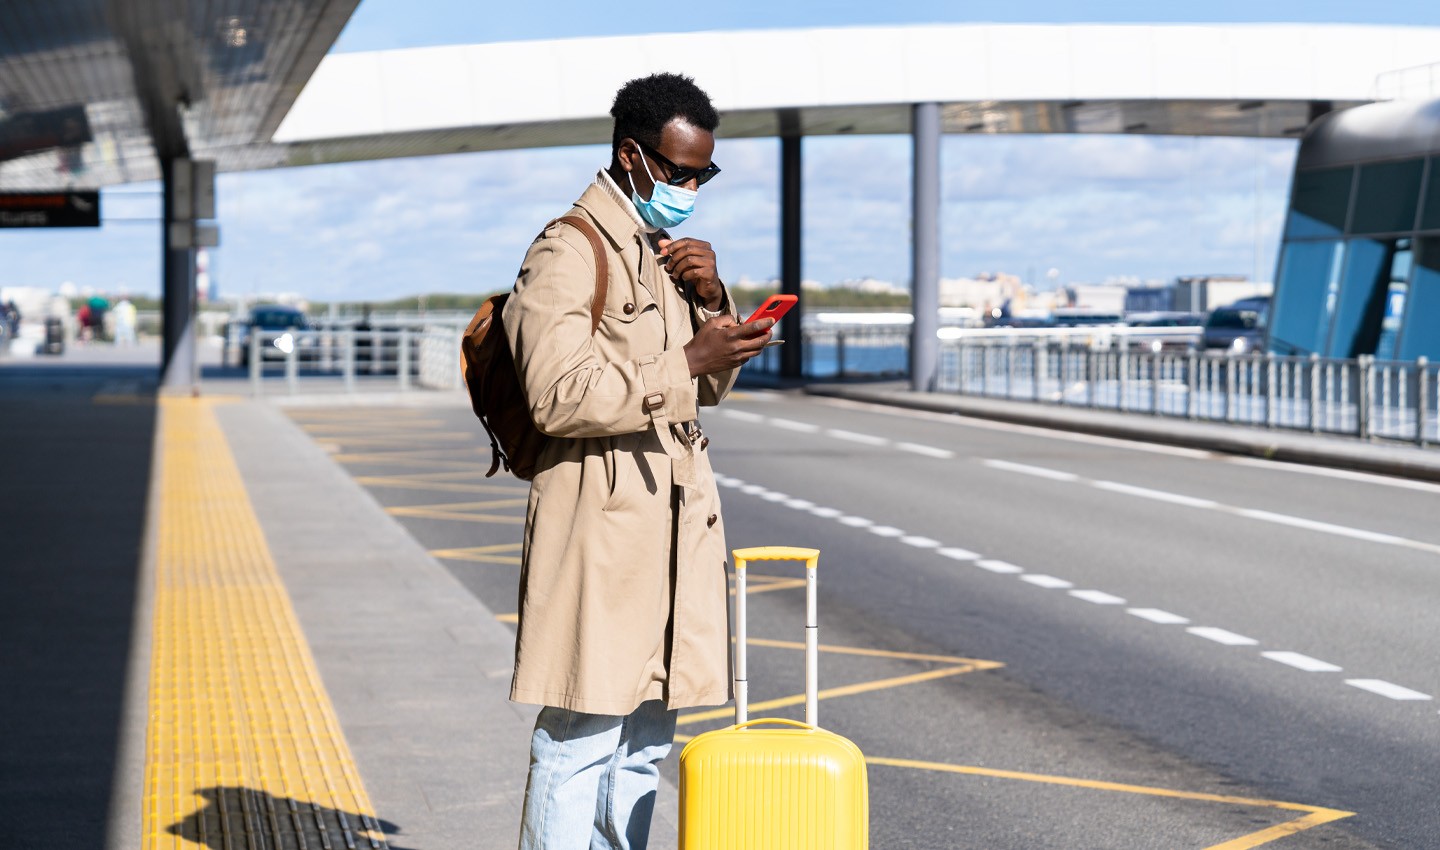  a man on his phone waiting with a suitcase outside an airport